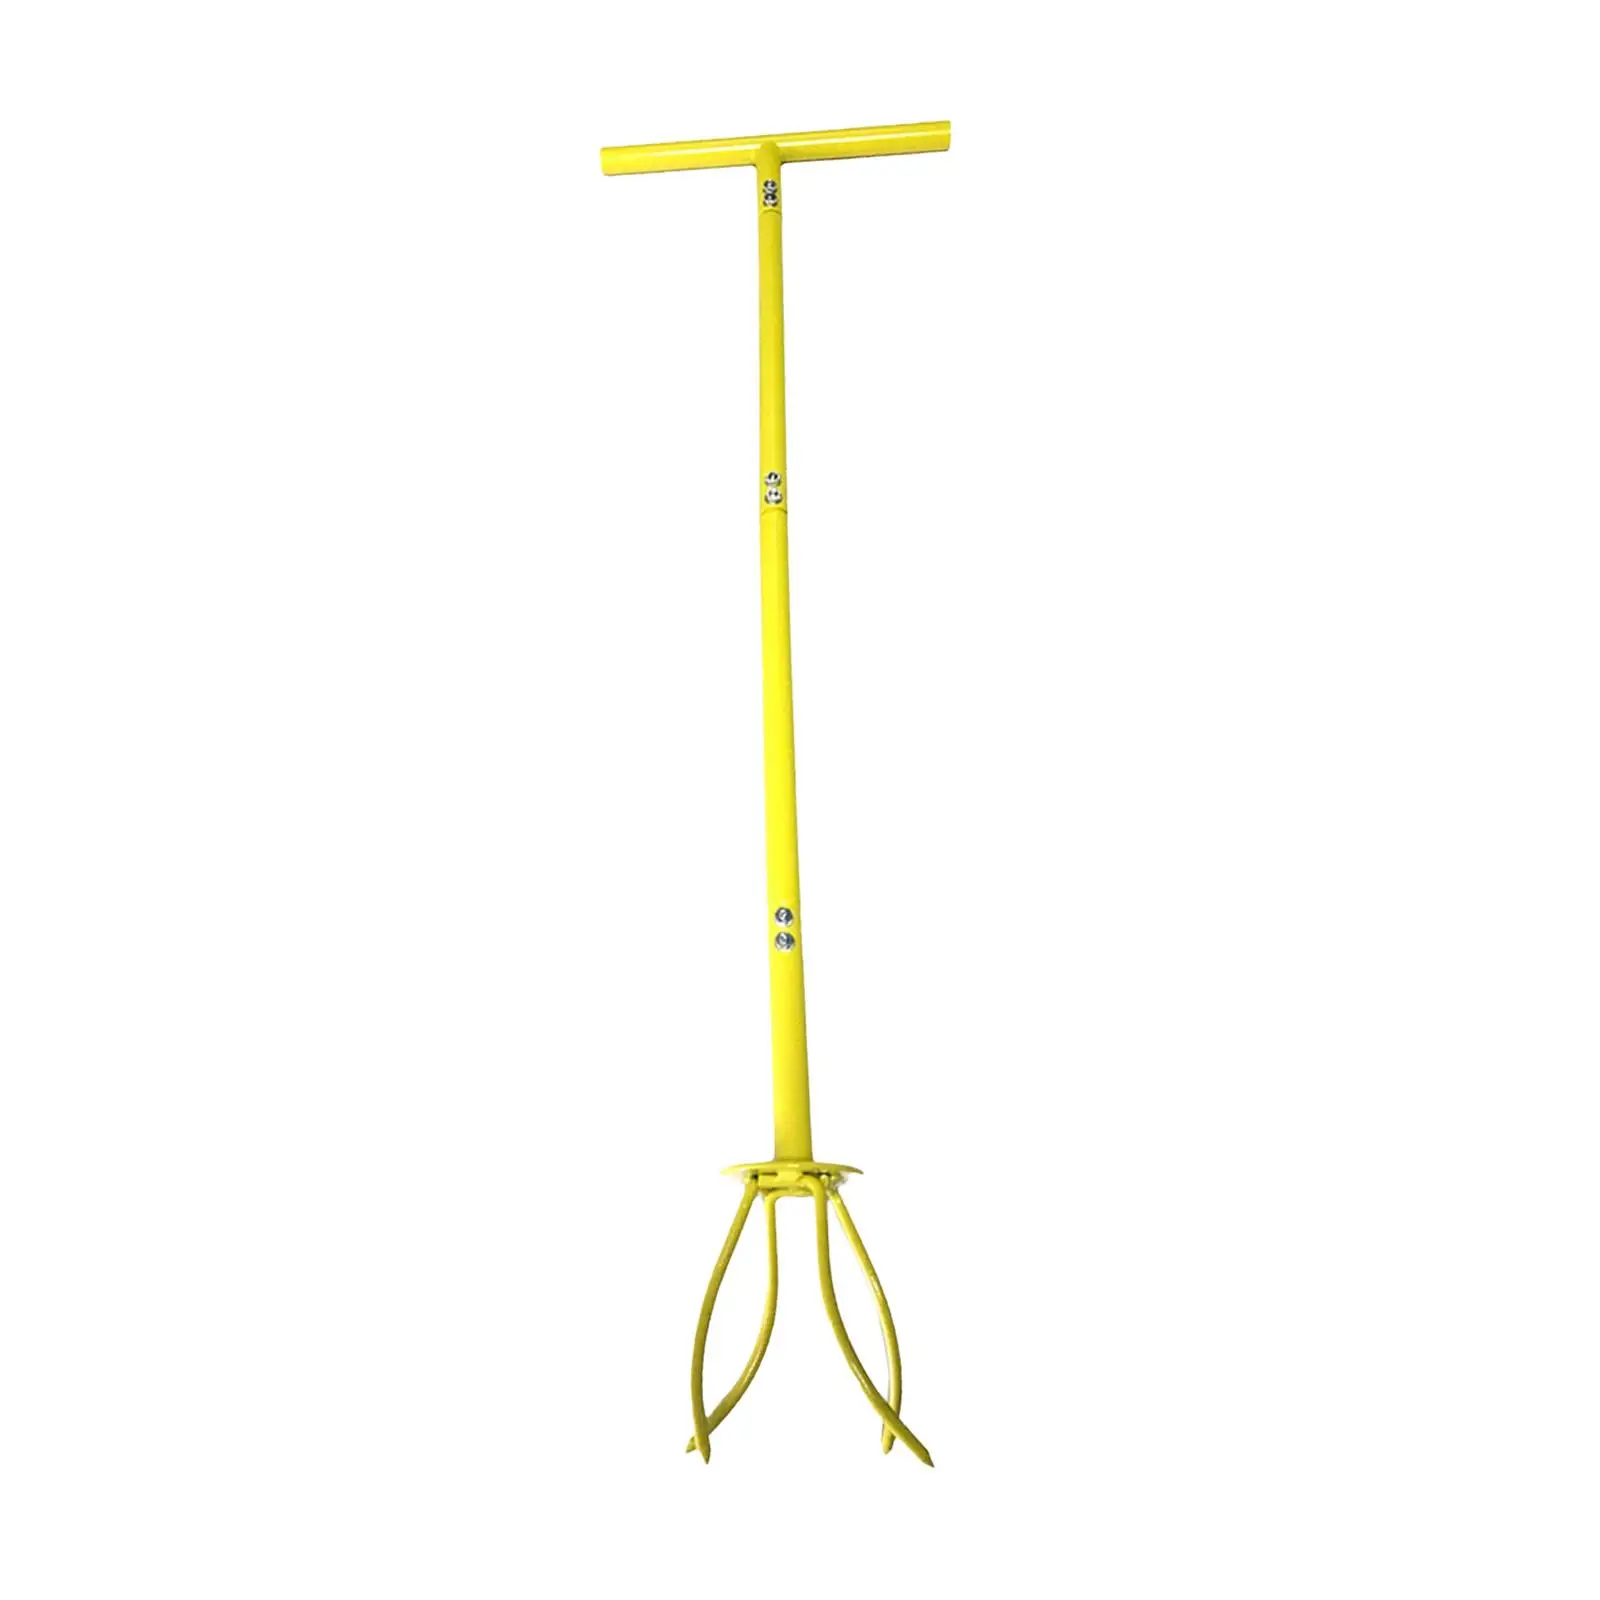 Manual Hand Tiller No Bending Strong Detachable Rugged with A Removable Big Claw Agriculture Garden Soil Tiller T Shaped Handle